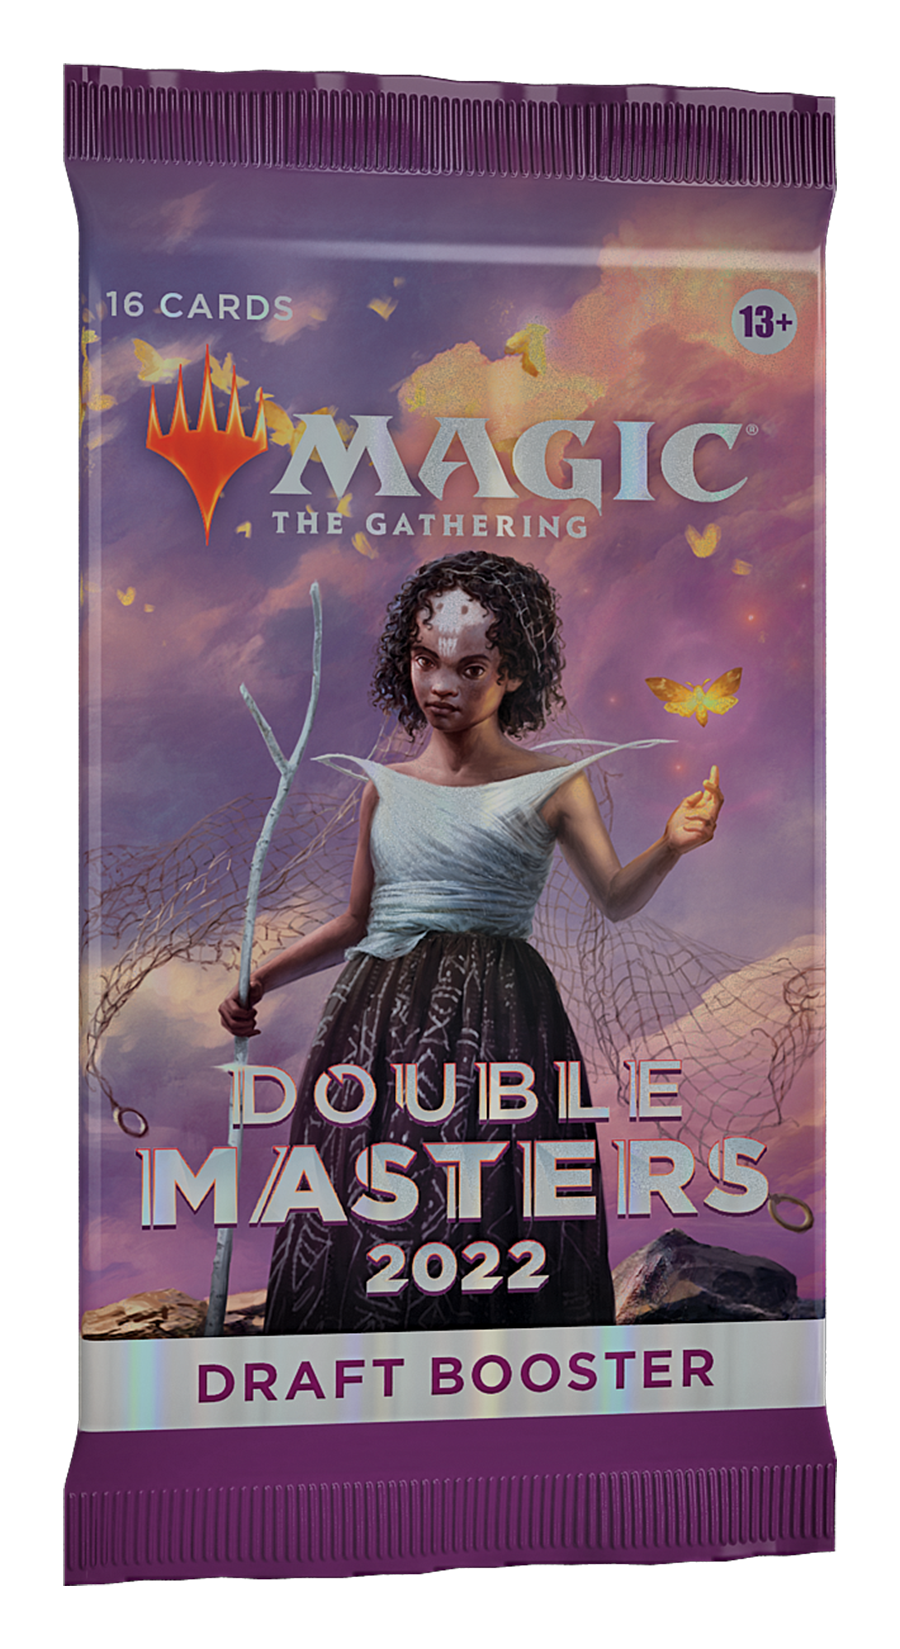 DOUBLE MASTERS 2022 - DRAFT BOOSTER 1 BUSTA SFUSA GIAPPONESE